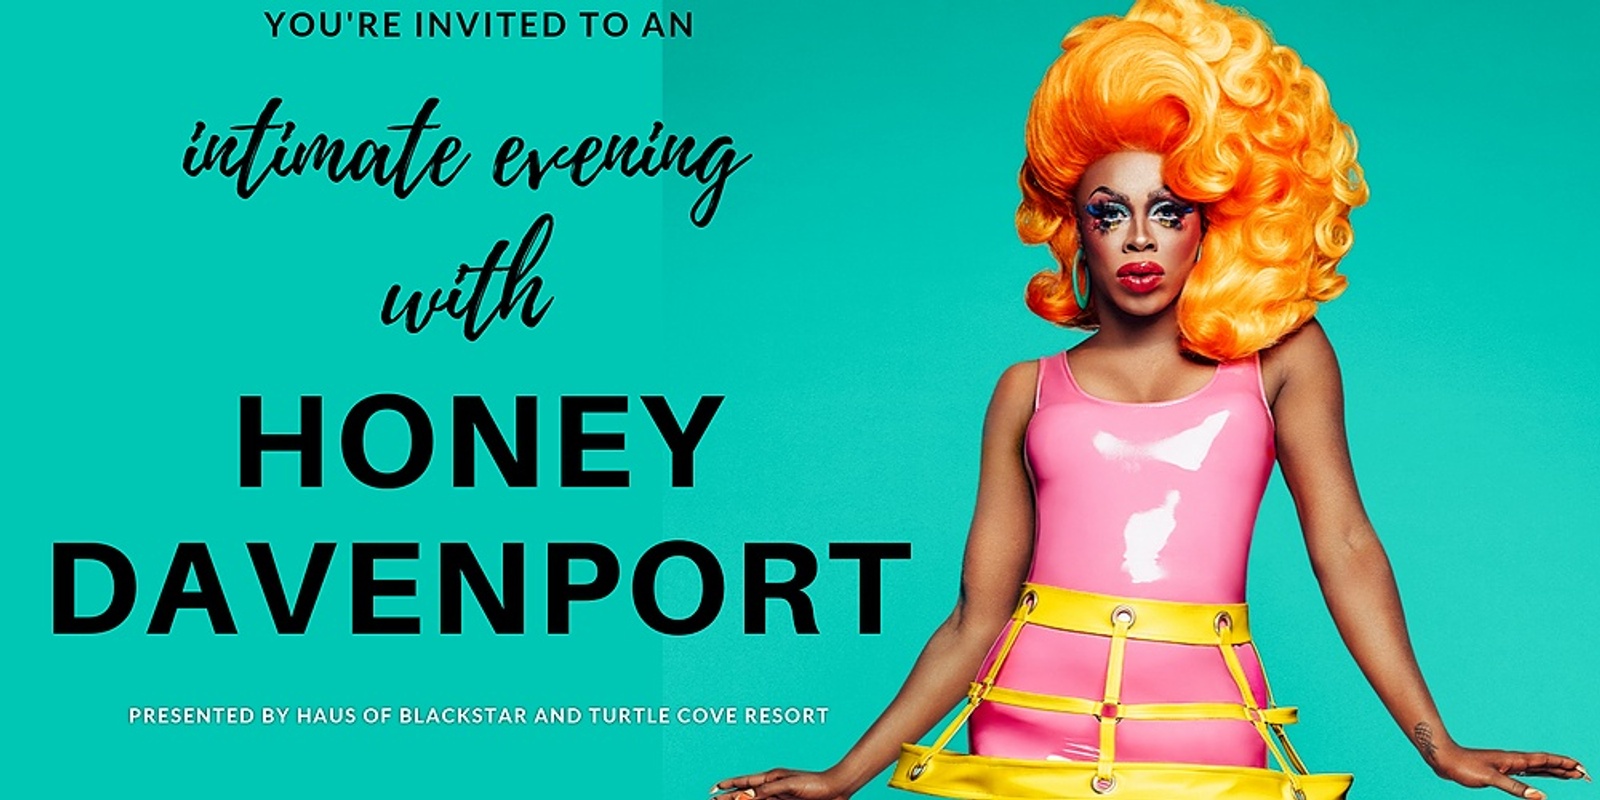 Banner image for A intimate evening with Honey Davenport